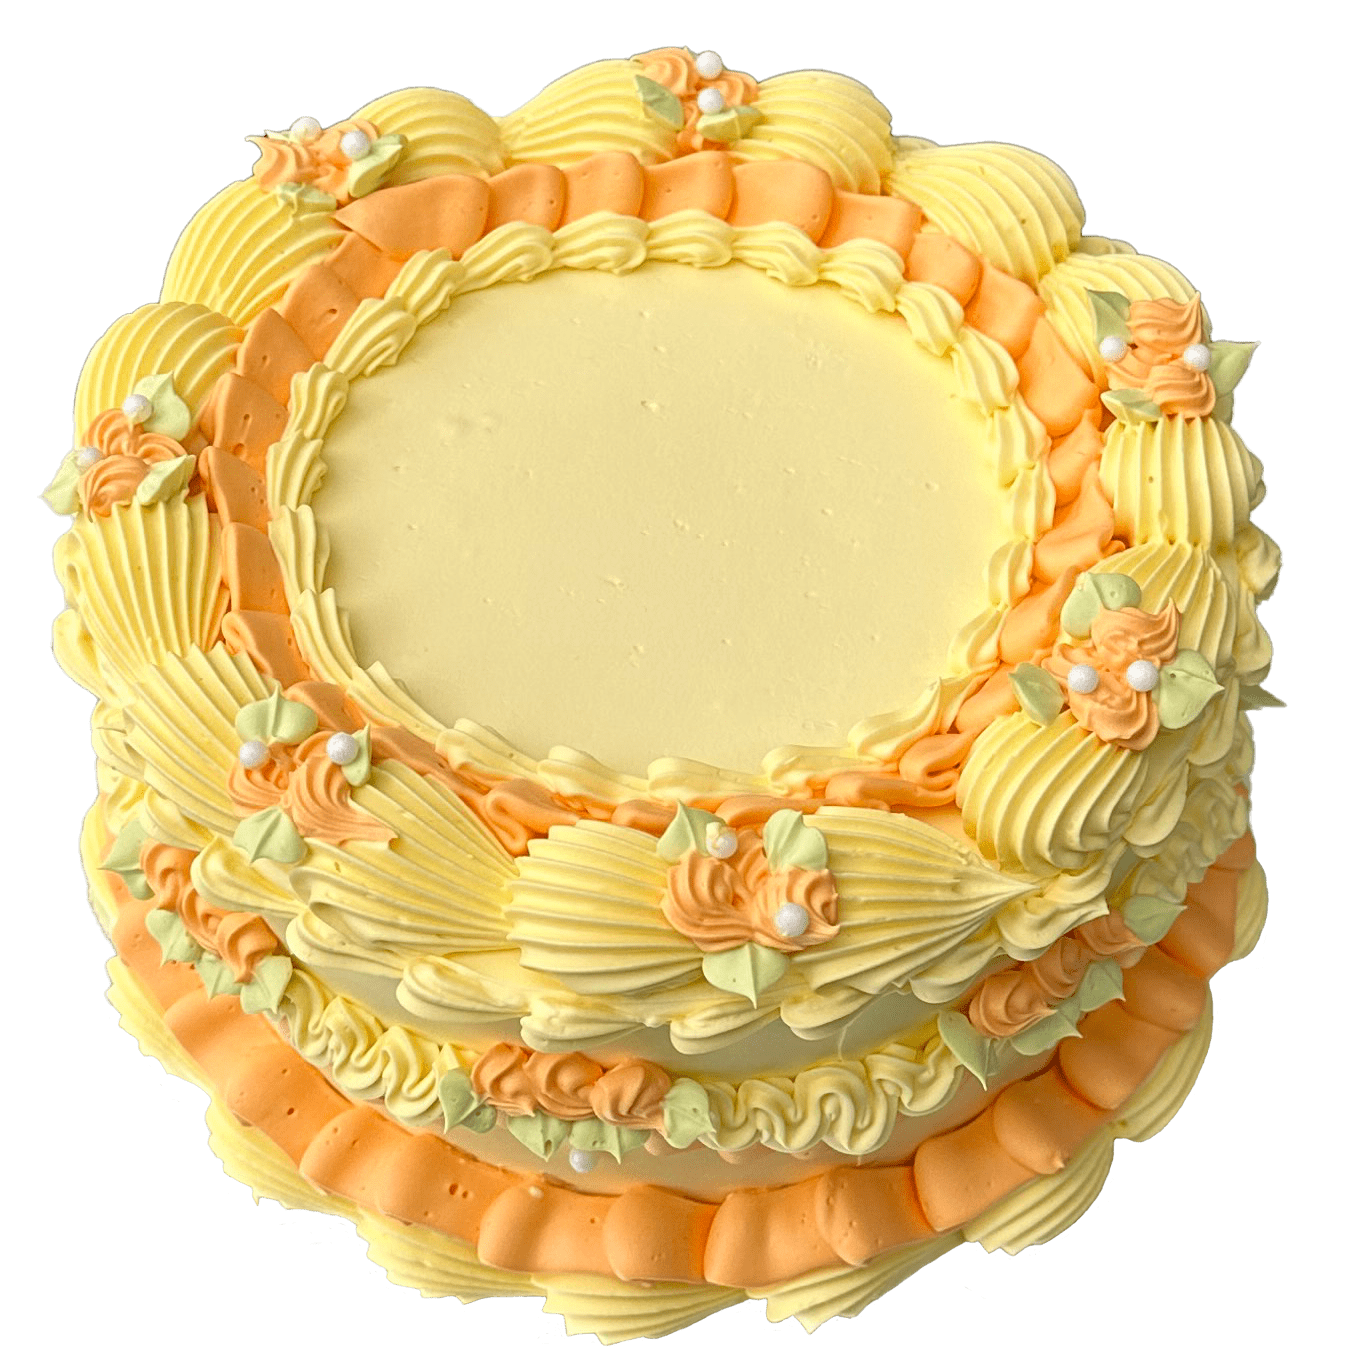 A classic round shaped vintage style cake coated with a yellow base colour swiss meringue buttercream and a simple orange piped ruffle around the outer edge and on top.  There are also a mixture of yellow large and small piped shells and small orange rose swirls with pastel green leaves and pearl decorations.  The top center of the cake is coated flat and smooth with  buttercream allowing for a message to be written.